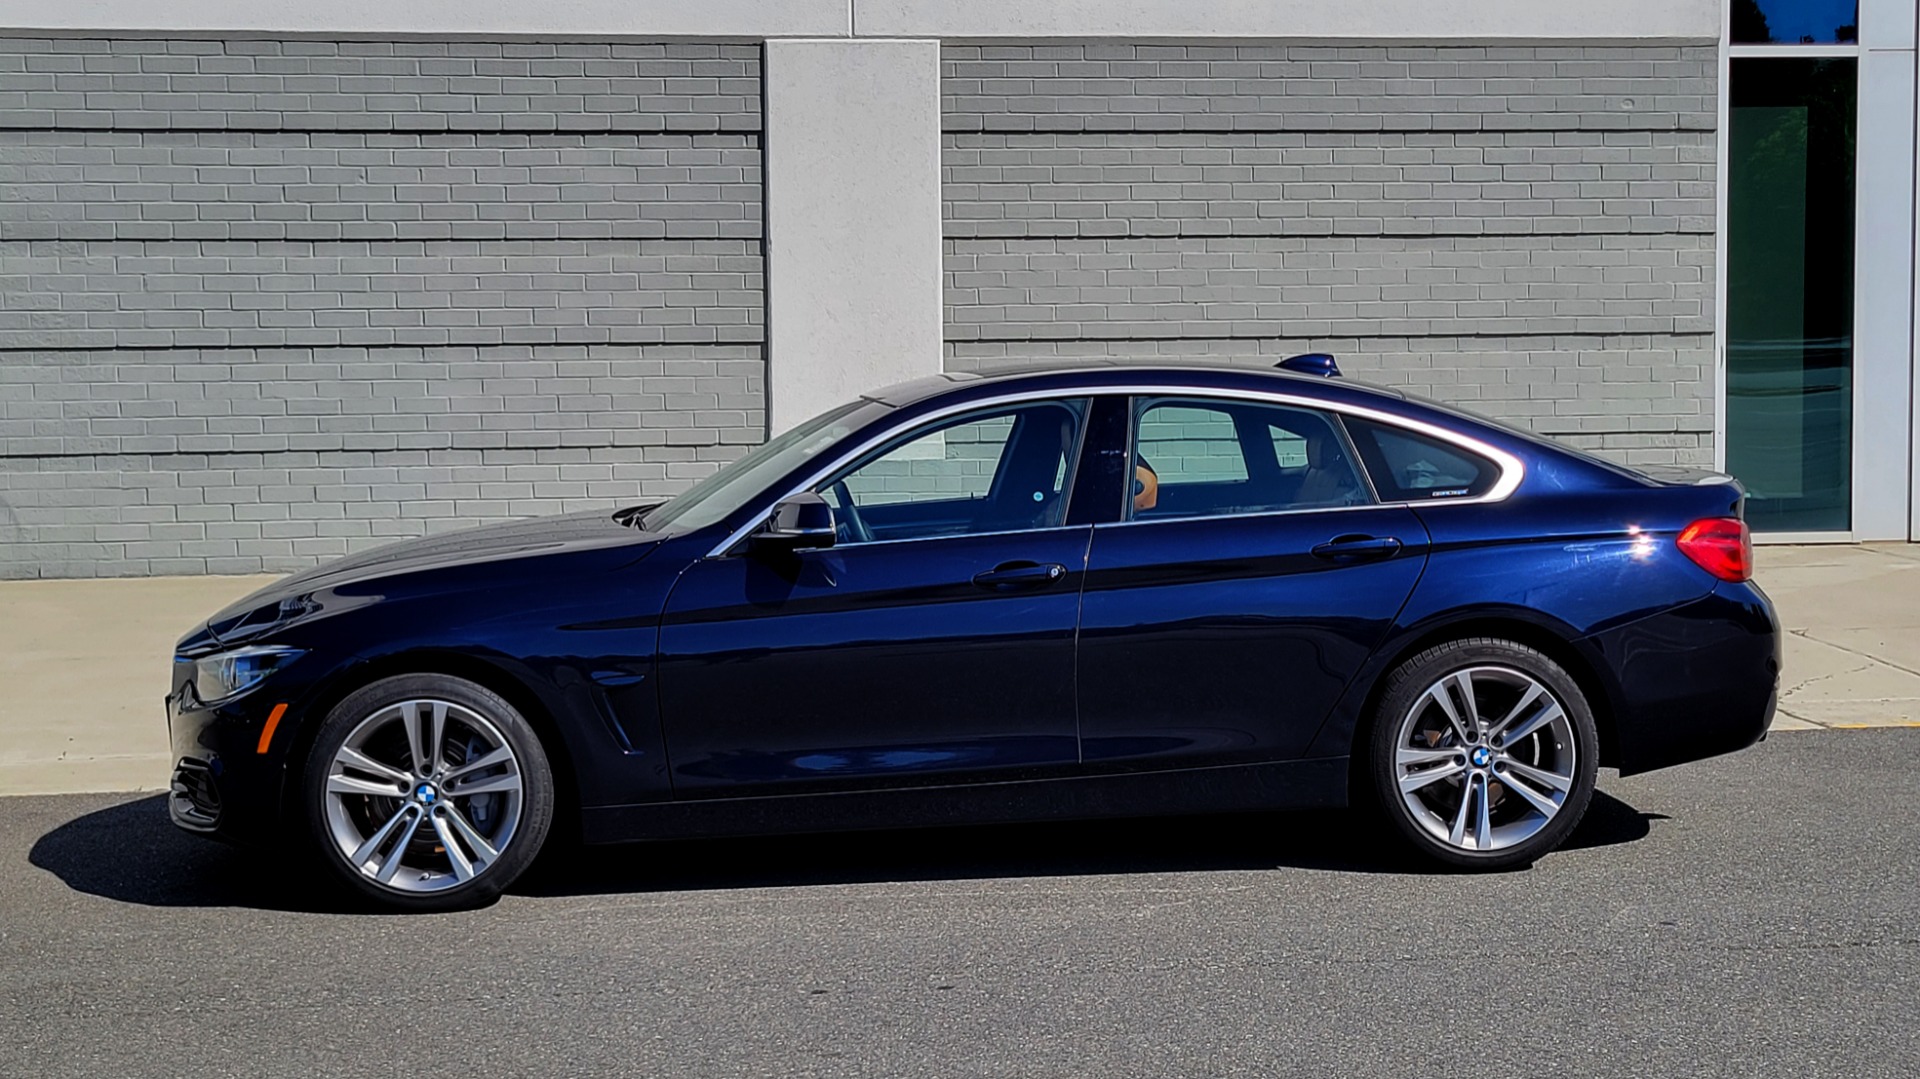 Used 2019 BMW 4 SERIES 440I XDRIVE GRAN COUPE / 3.0L / CONV PKG / HTD STS / REARVIEW for sale $39,995 at Formula Imports in Charlotte NC 28227 4